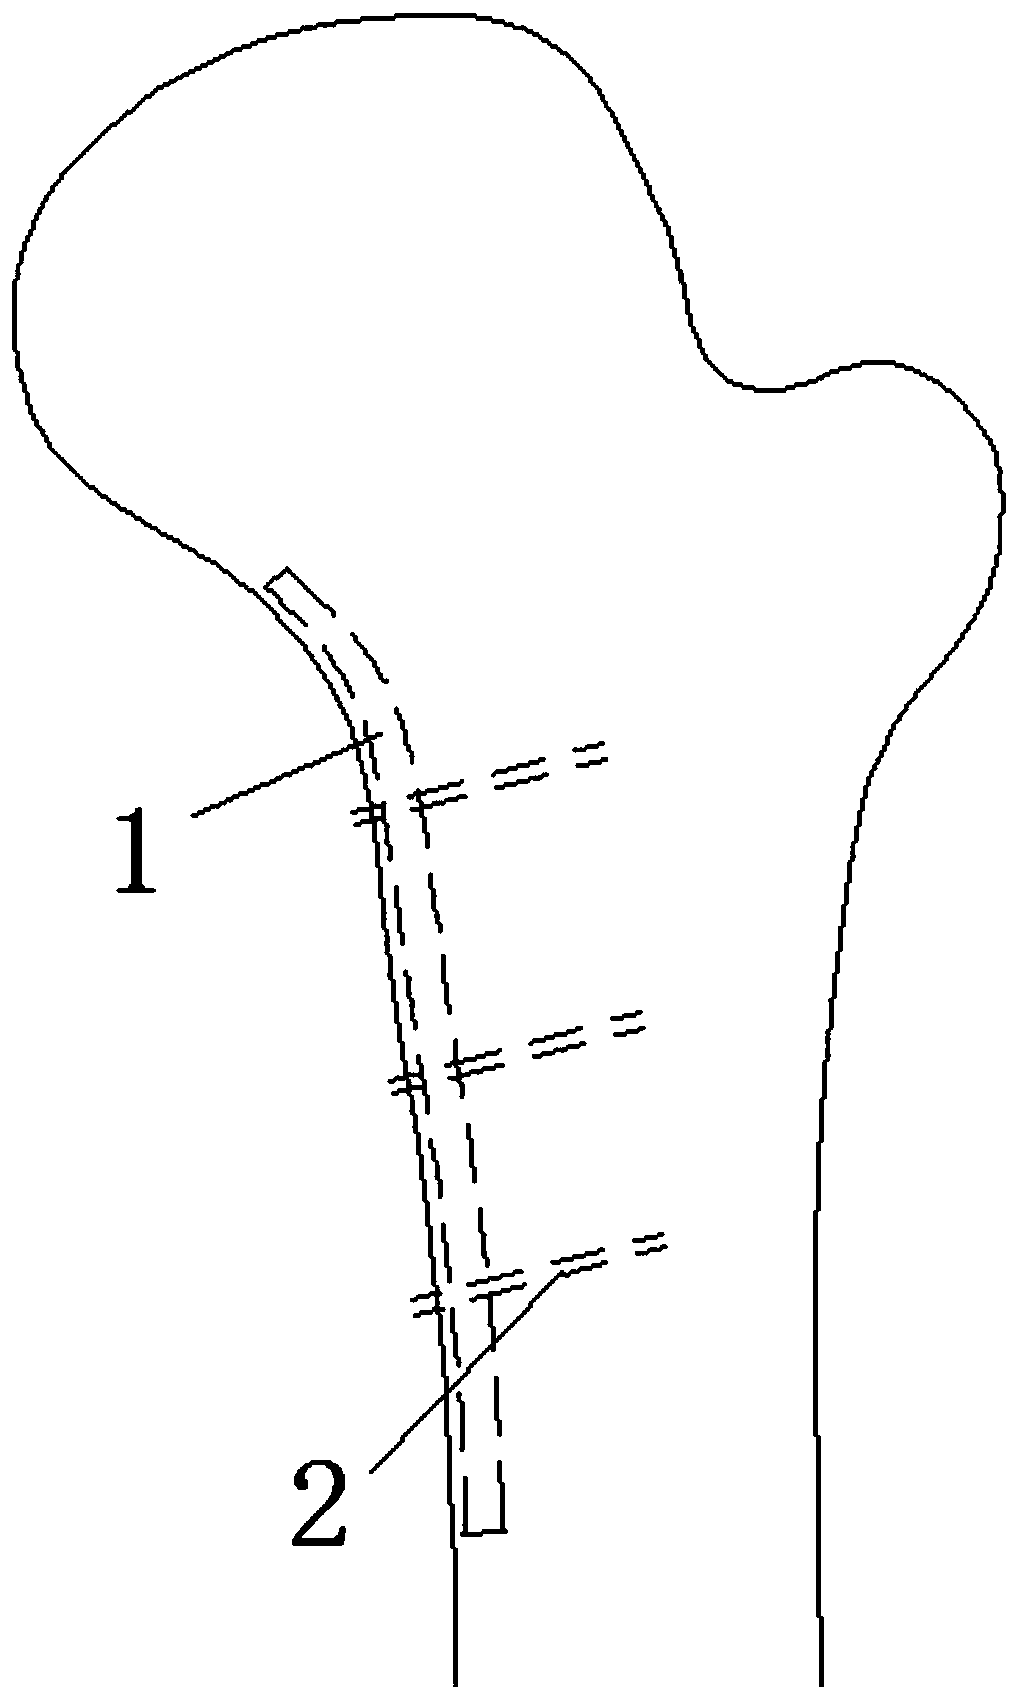 Inside support structure for medullary cavity suitable for strengthening internal fixation for proximal femoral fracture